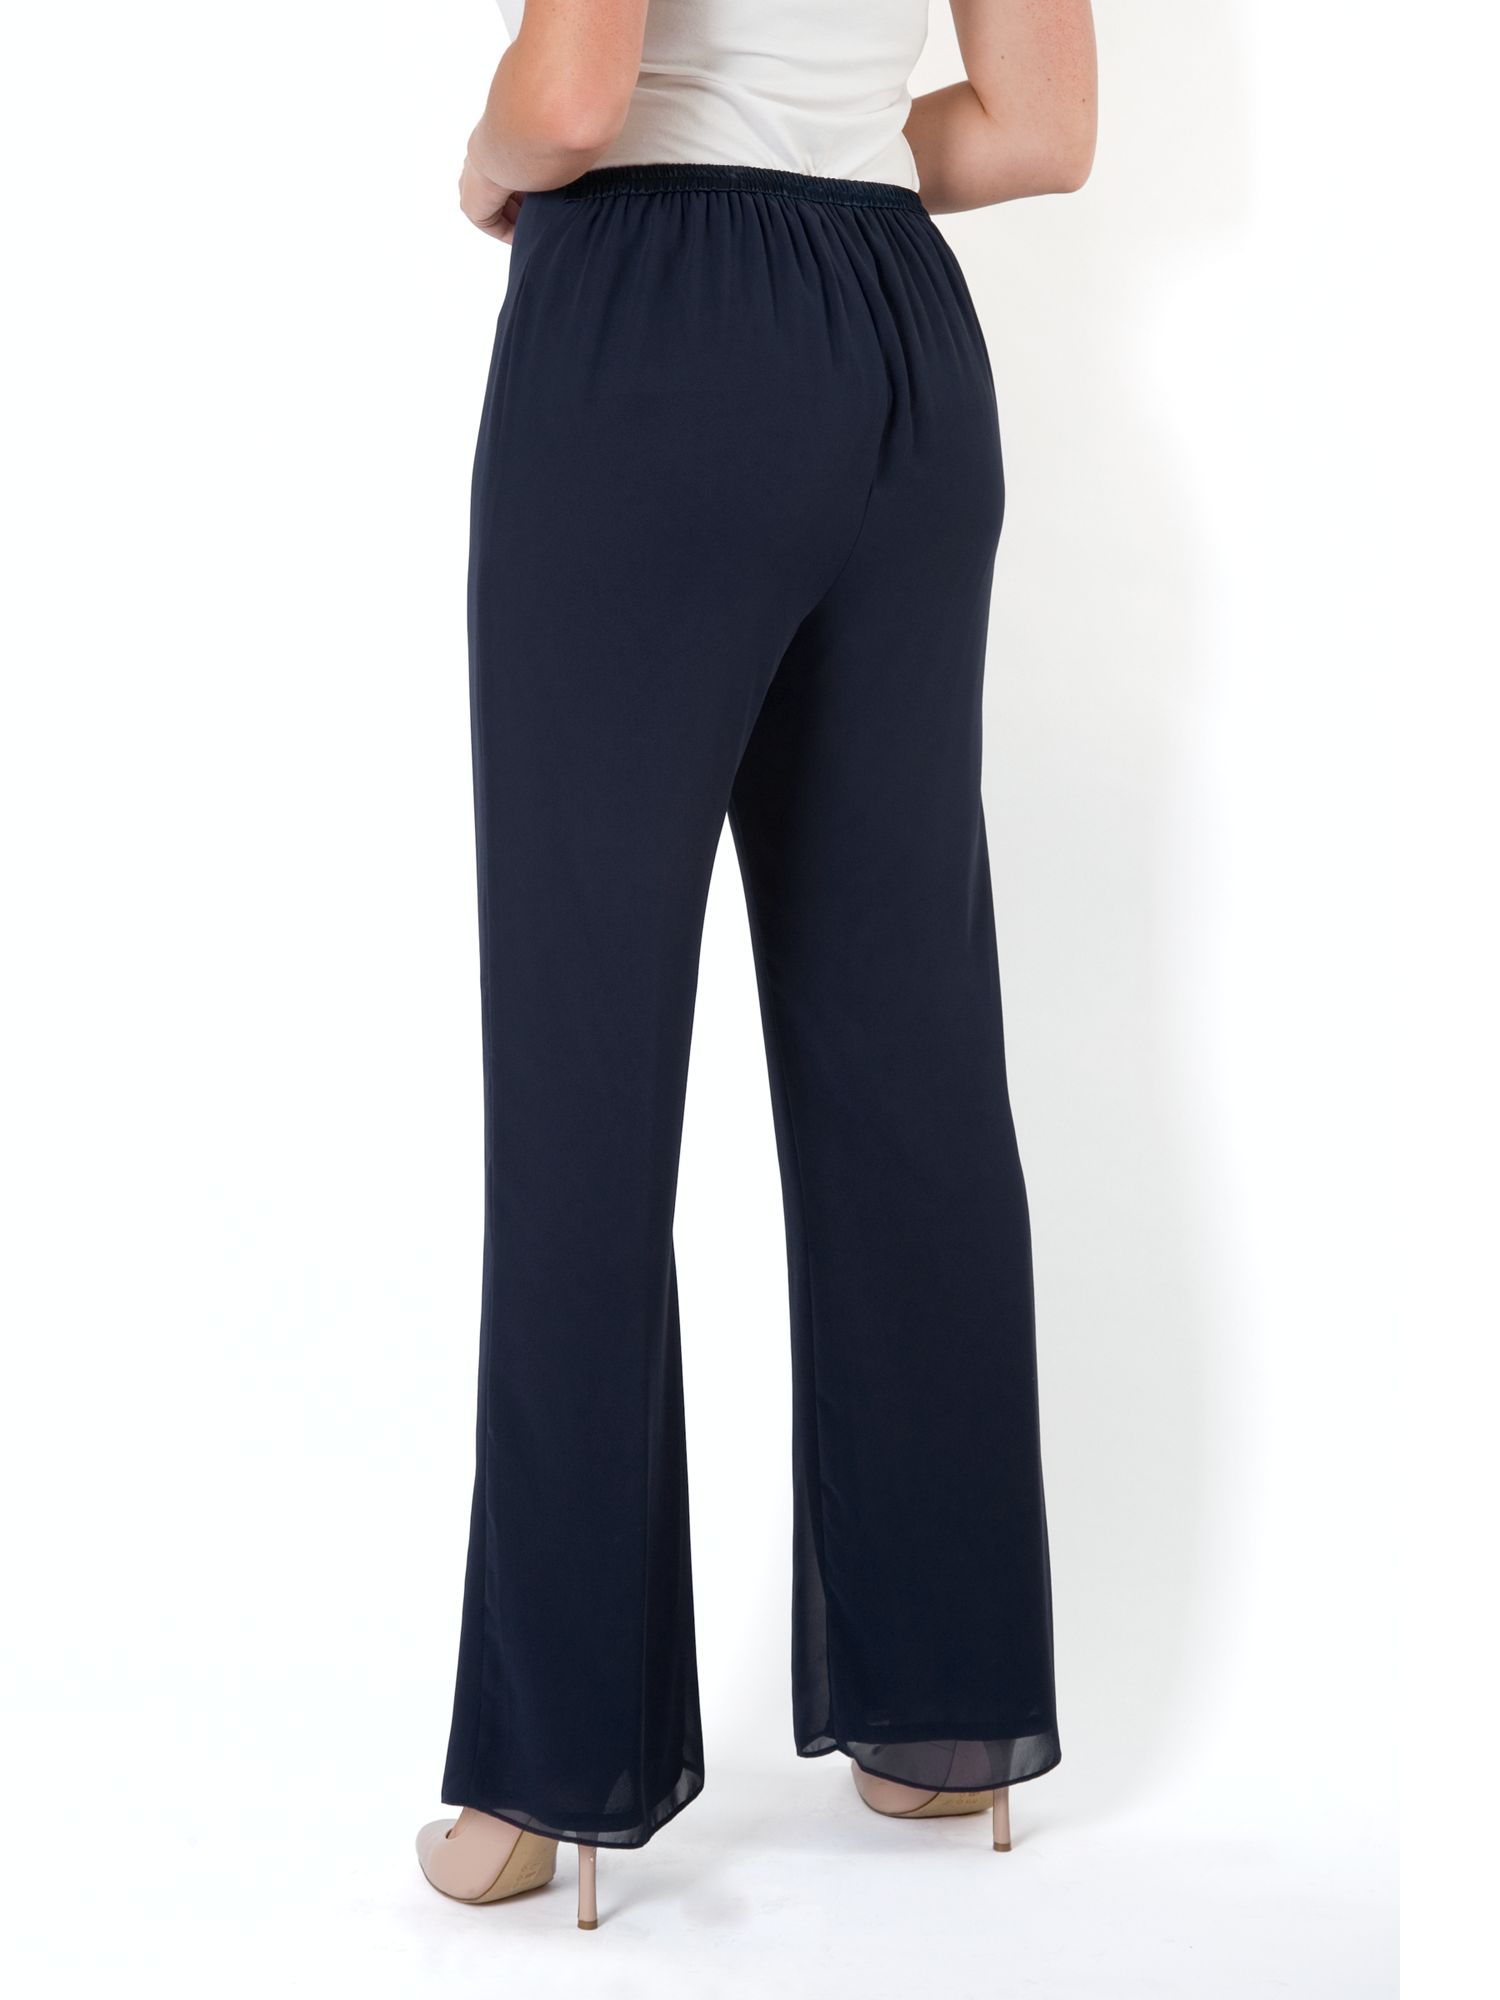 Chesca Jersey Lined Chiffon Trousers, Navy at John Lewis & Partners